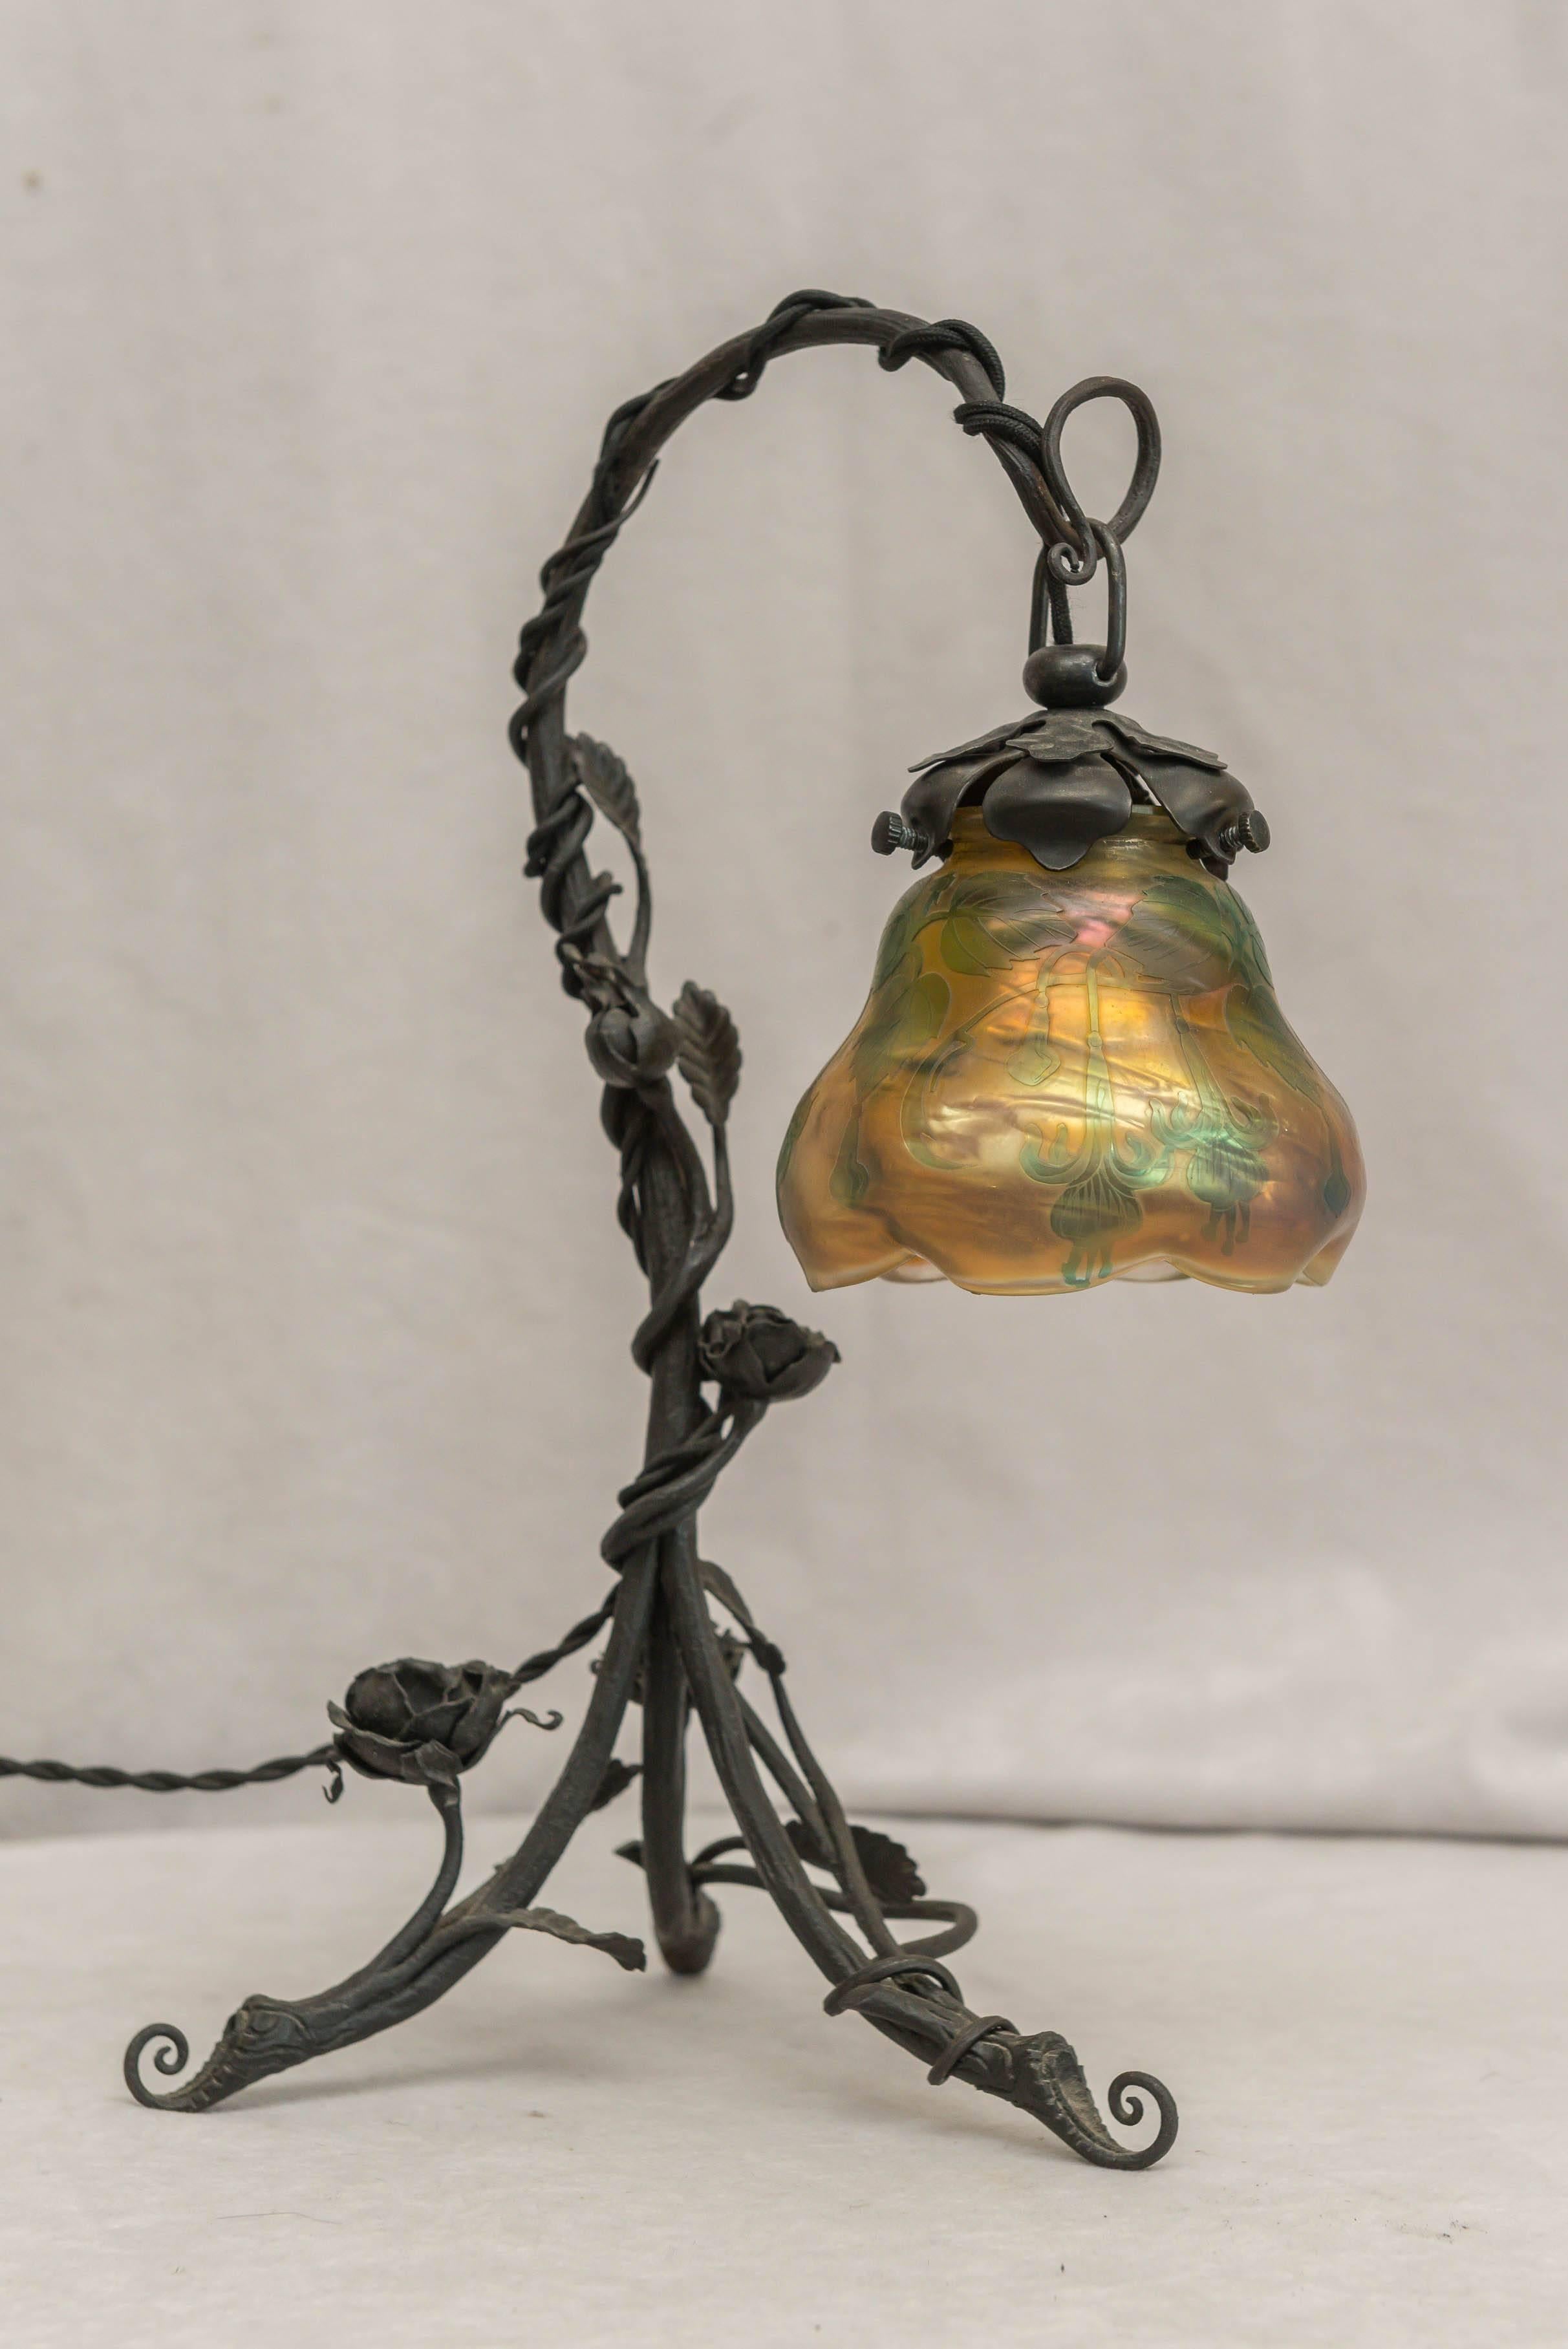 Hand-Crafted Art Nouveau Boudoir Lamp with Cameo Glass Shade